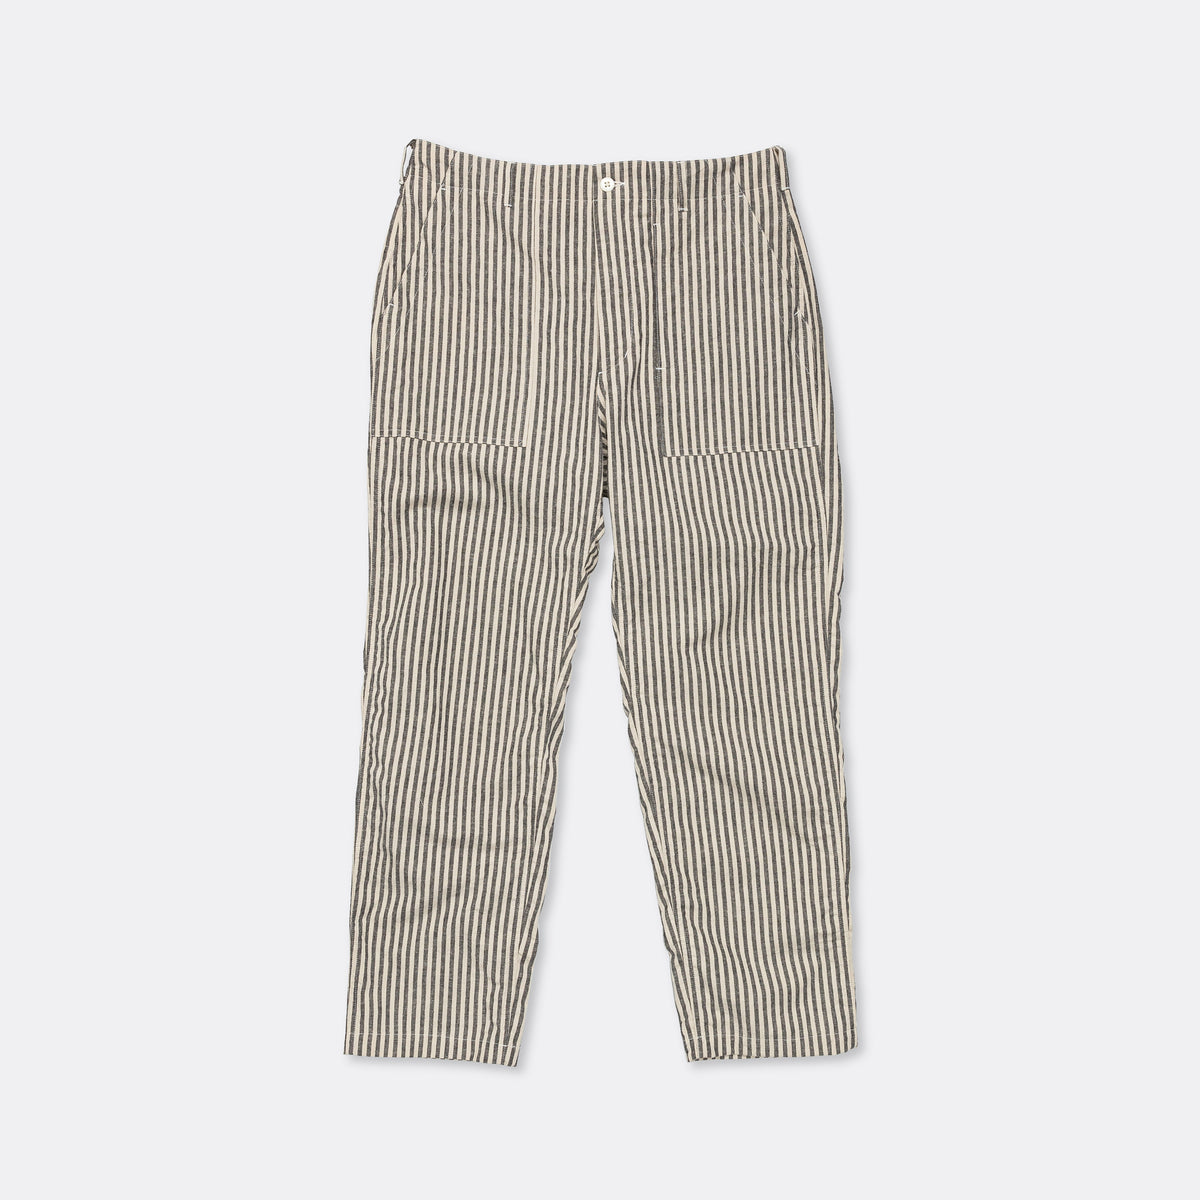 Fatigue Pant - Natural/Black LC Stripe | UP THERE